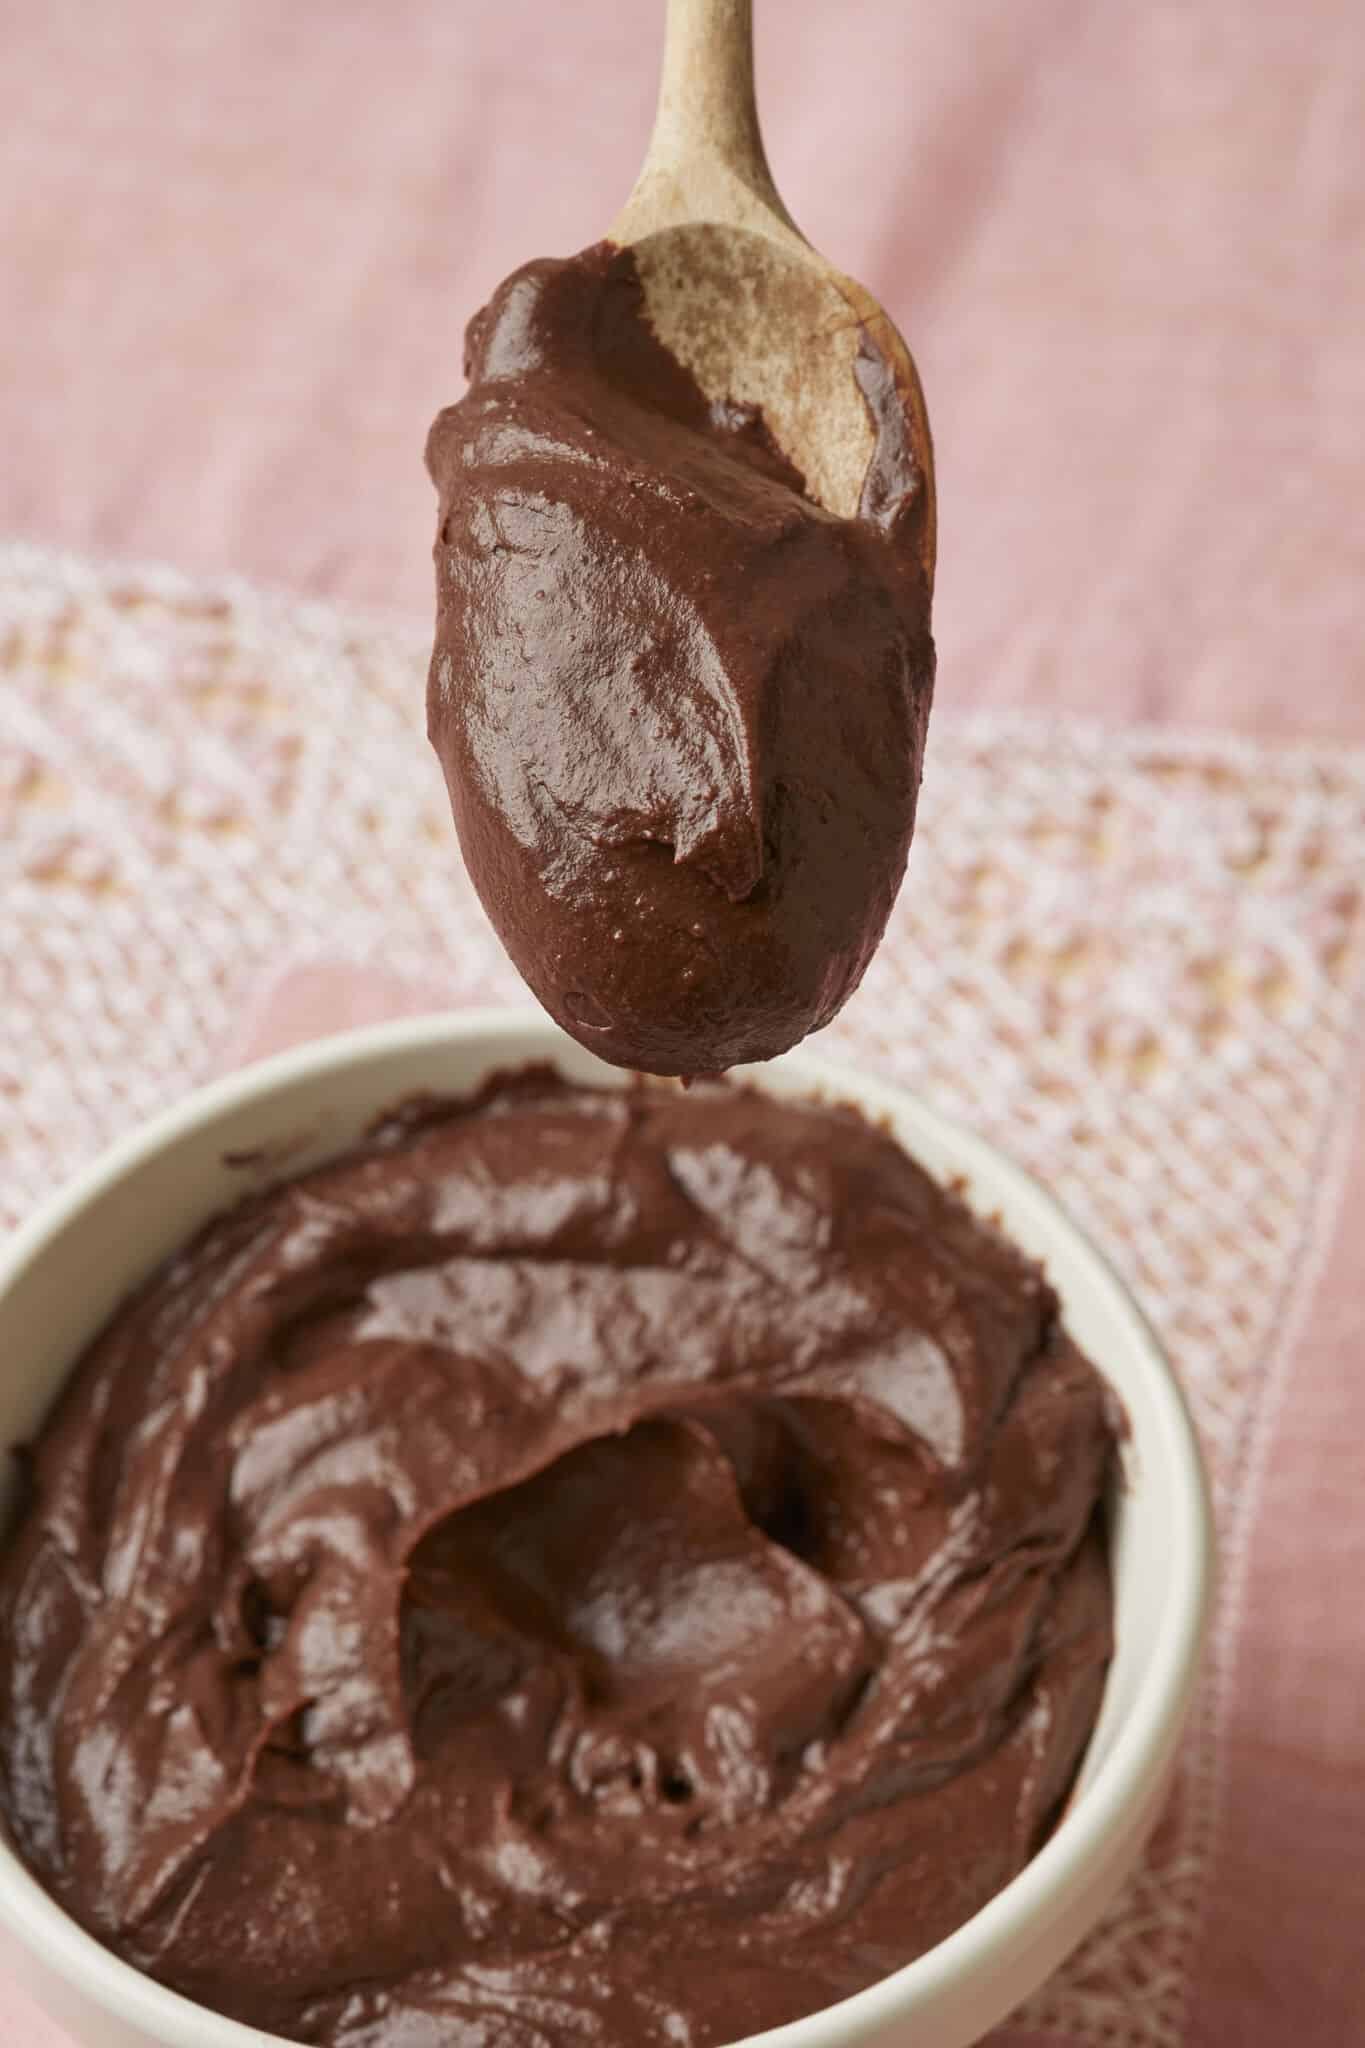 A close-up shot at the being-lifted spoon of Chocolate Pastry Cream shows its gloss and thickness. 